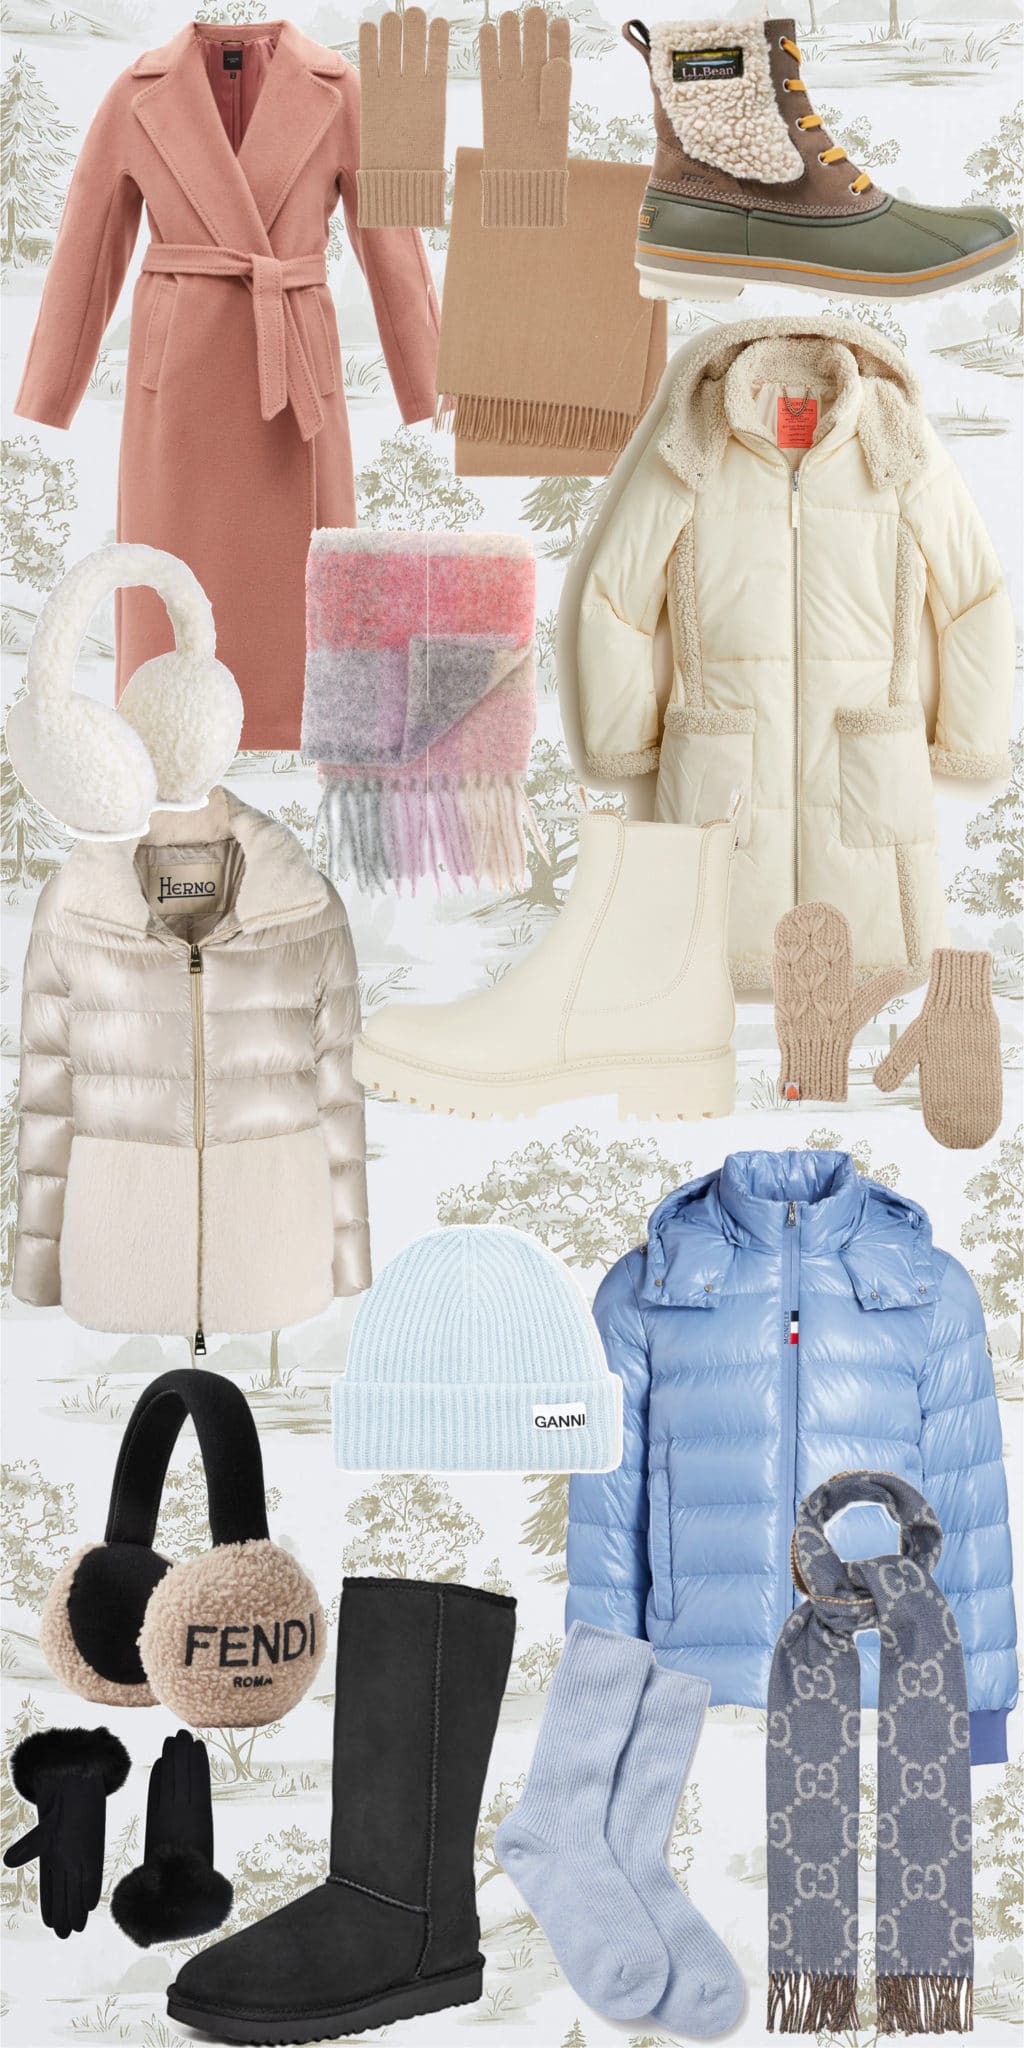 cold weather accessories for women